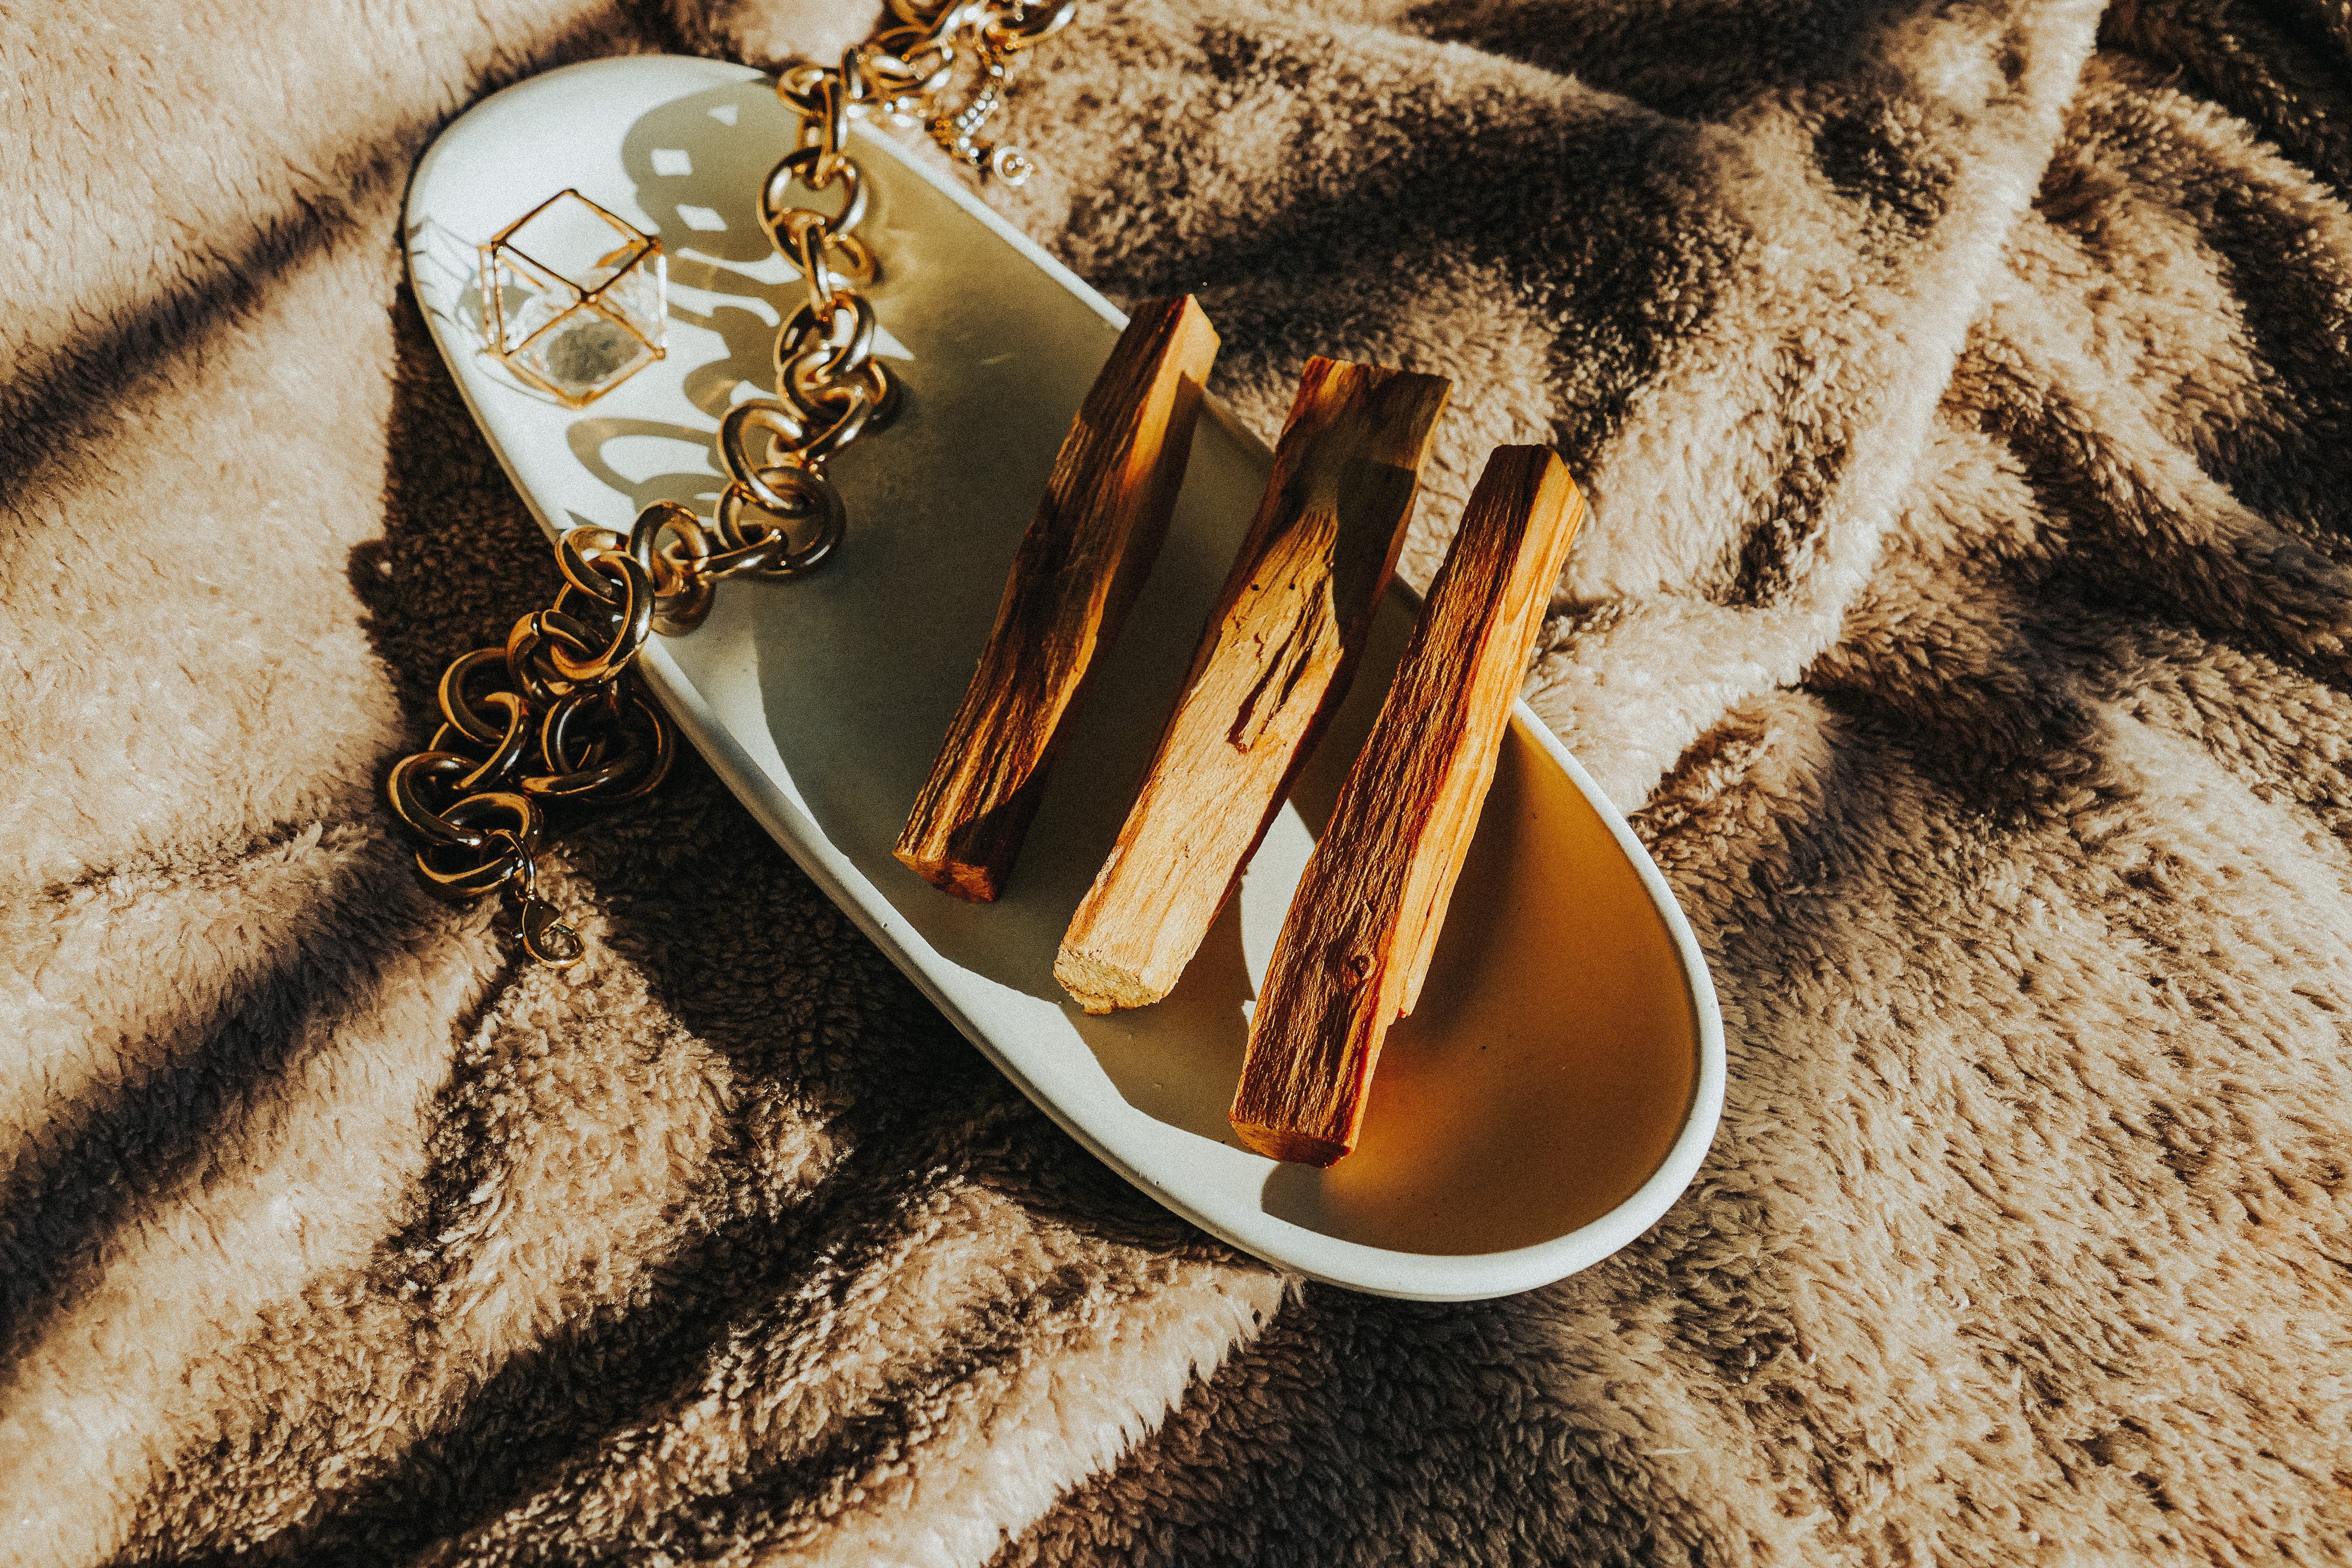 Everything you need to know about the miracle wood of Palo Santo